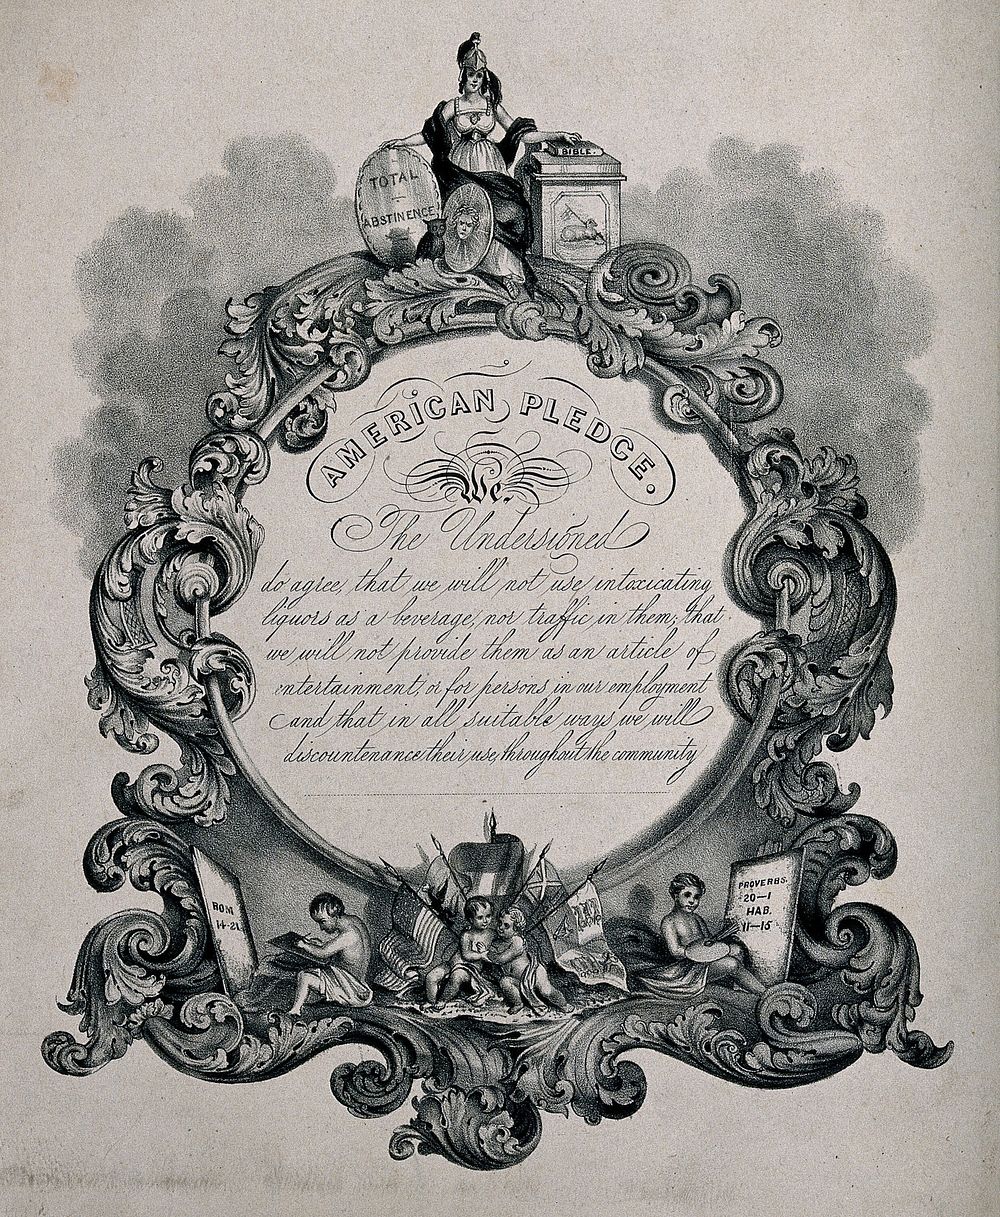 The "American Pledge" for total abstinence surrounded by an ornate border. Lithograph, c. 1860 .